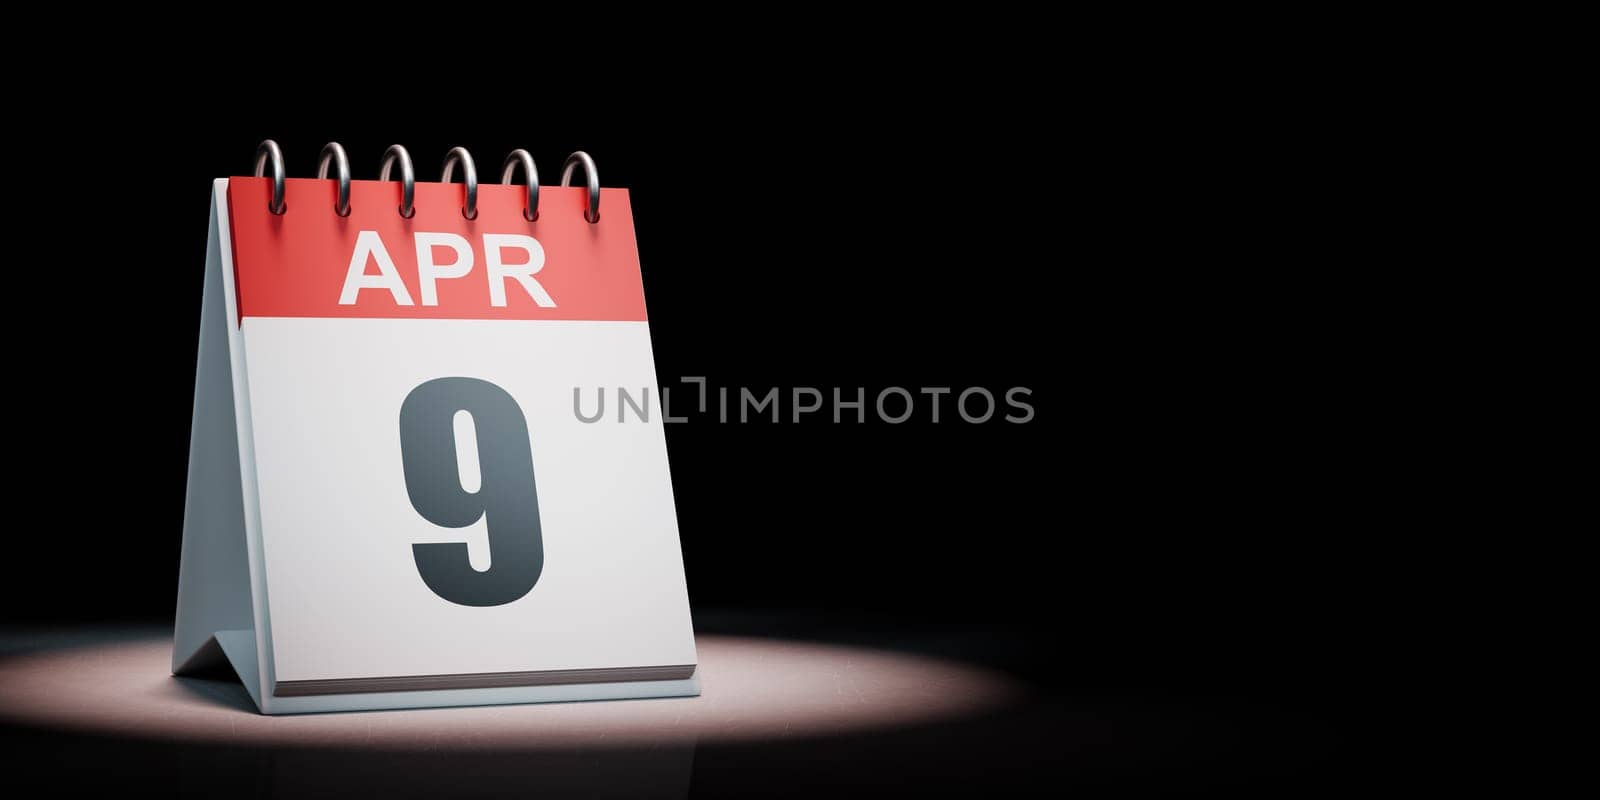 Red and White April 9 Desk Calendar Spotlighted on Black Background with Copy Space 3D Illustration